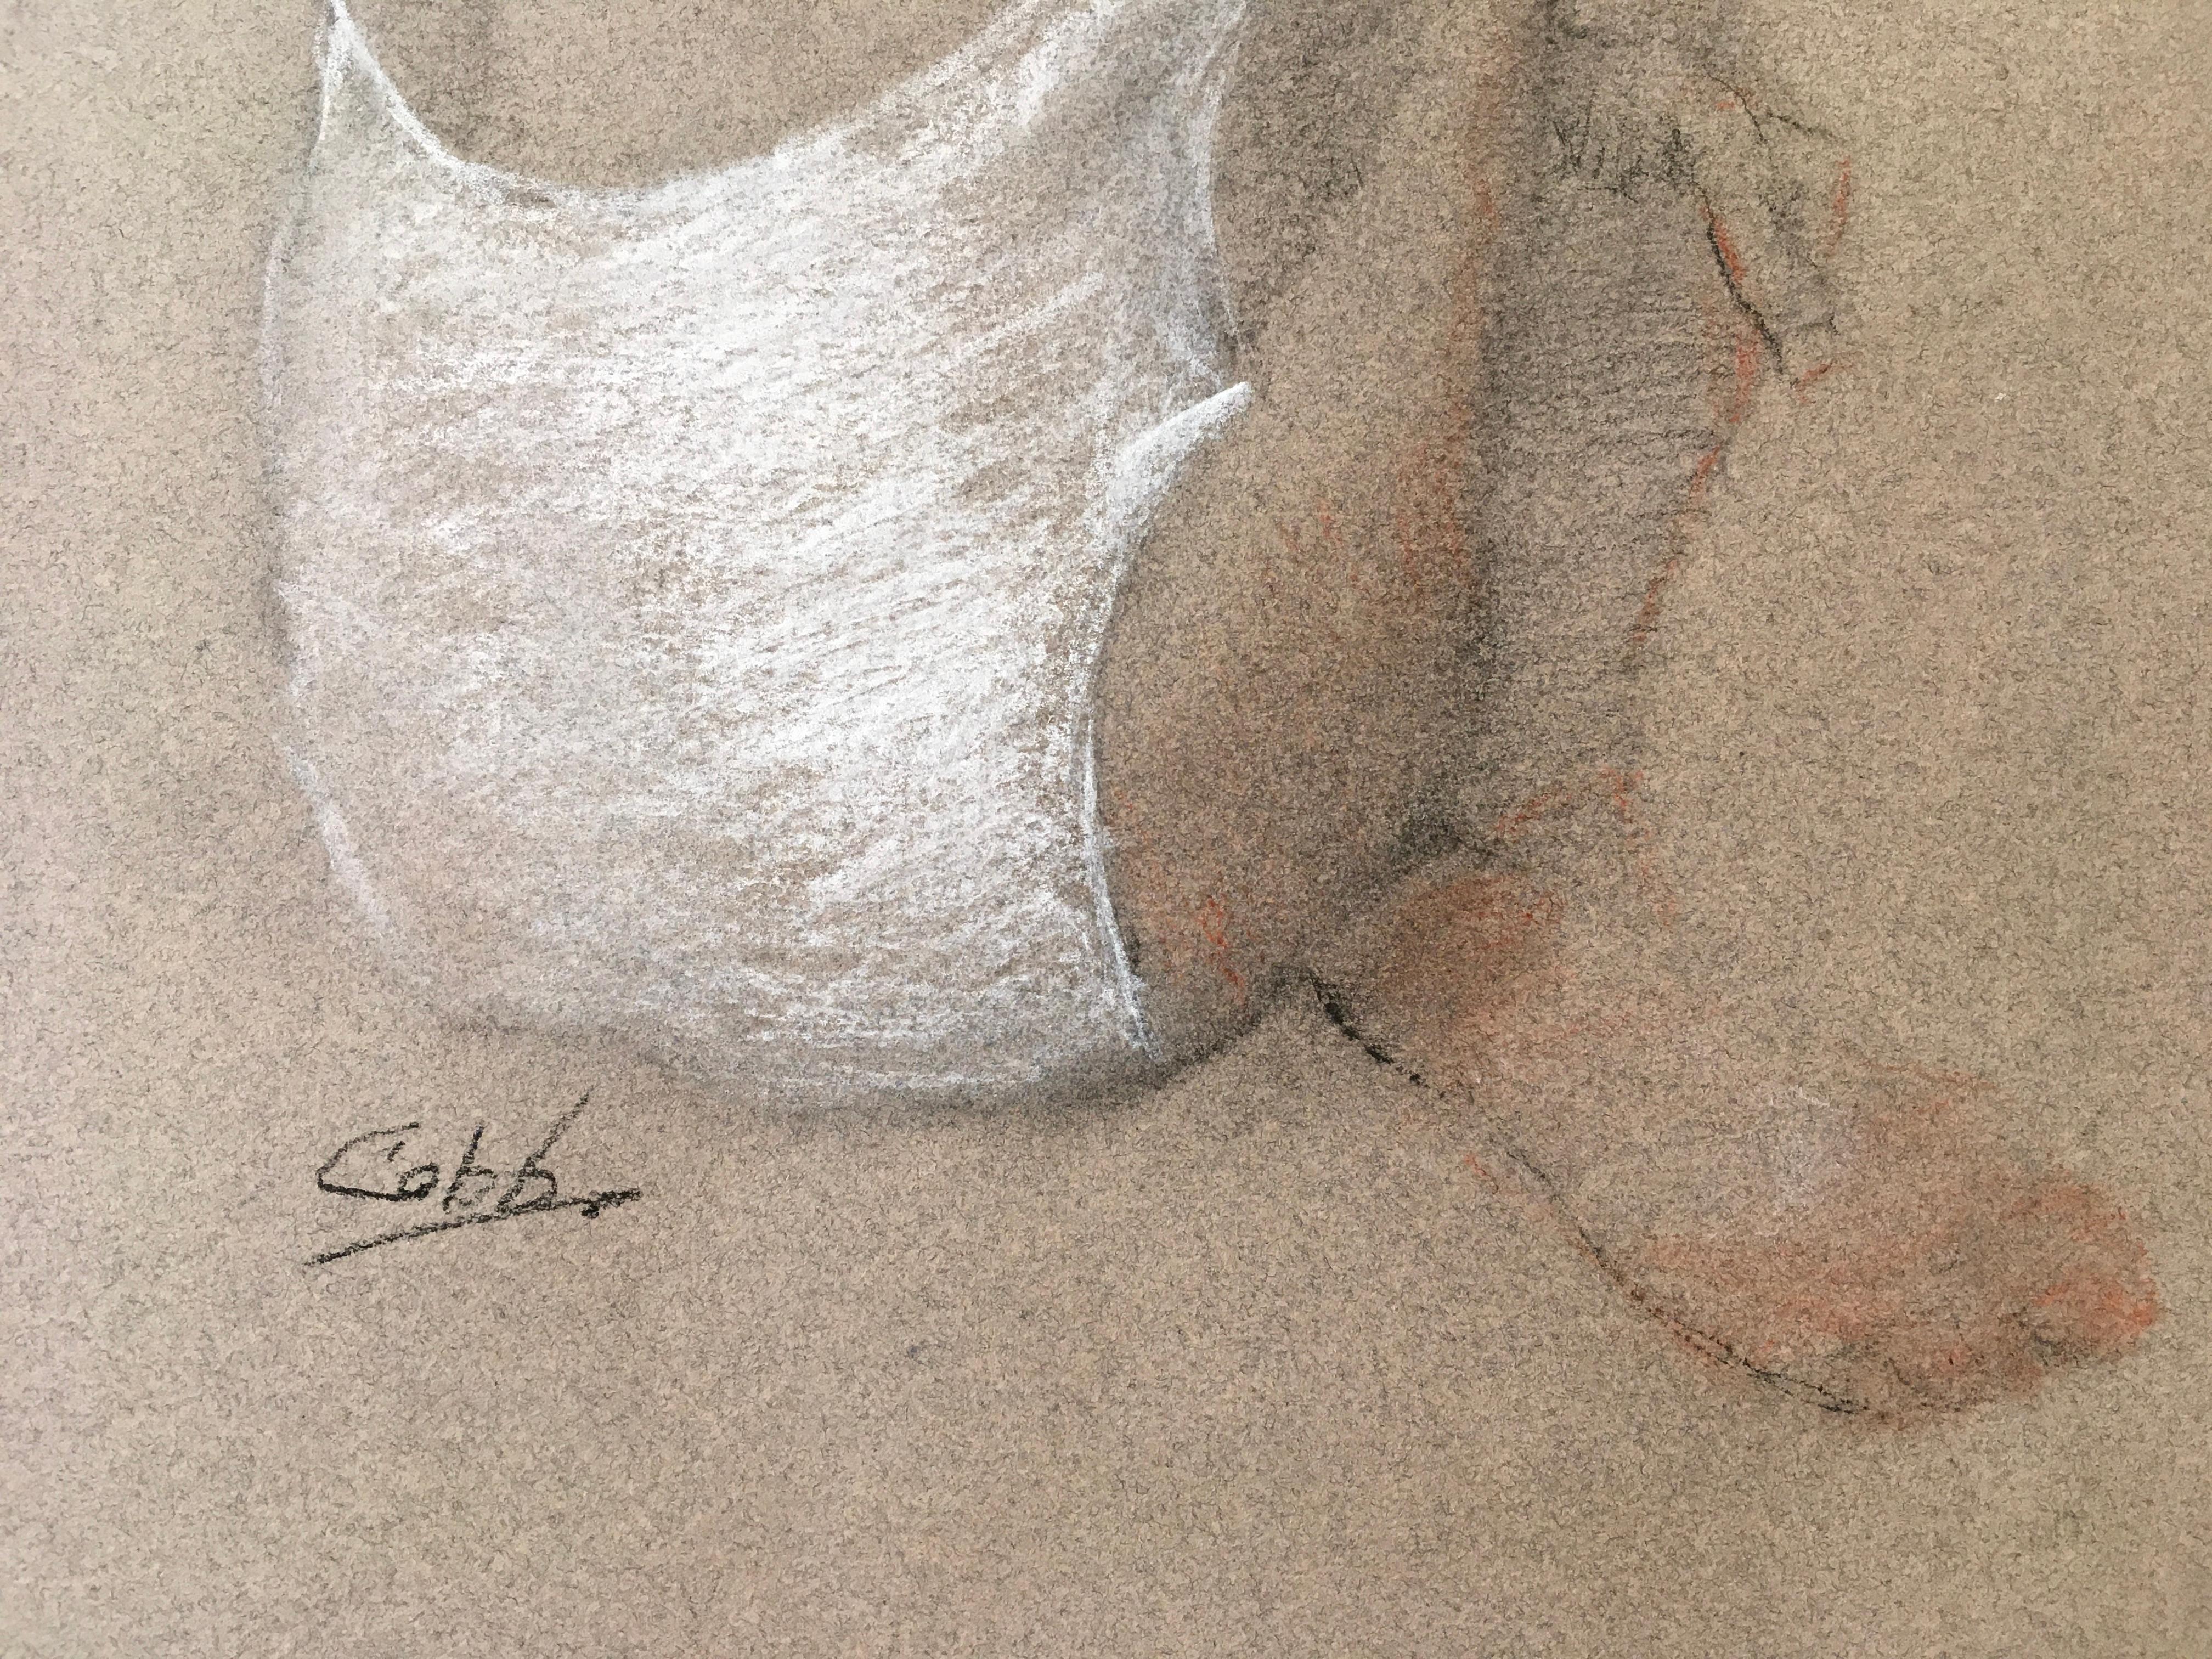 This 13.5 x 10 inch chalk and Conté work on paper, with 20.25 x 16 mat features a lone seated female dancer in a white leotard. With her back to the viewer, her posture seems to indicate a focus on something just in front of her, but outside view of